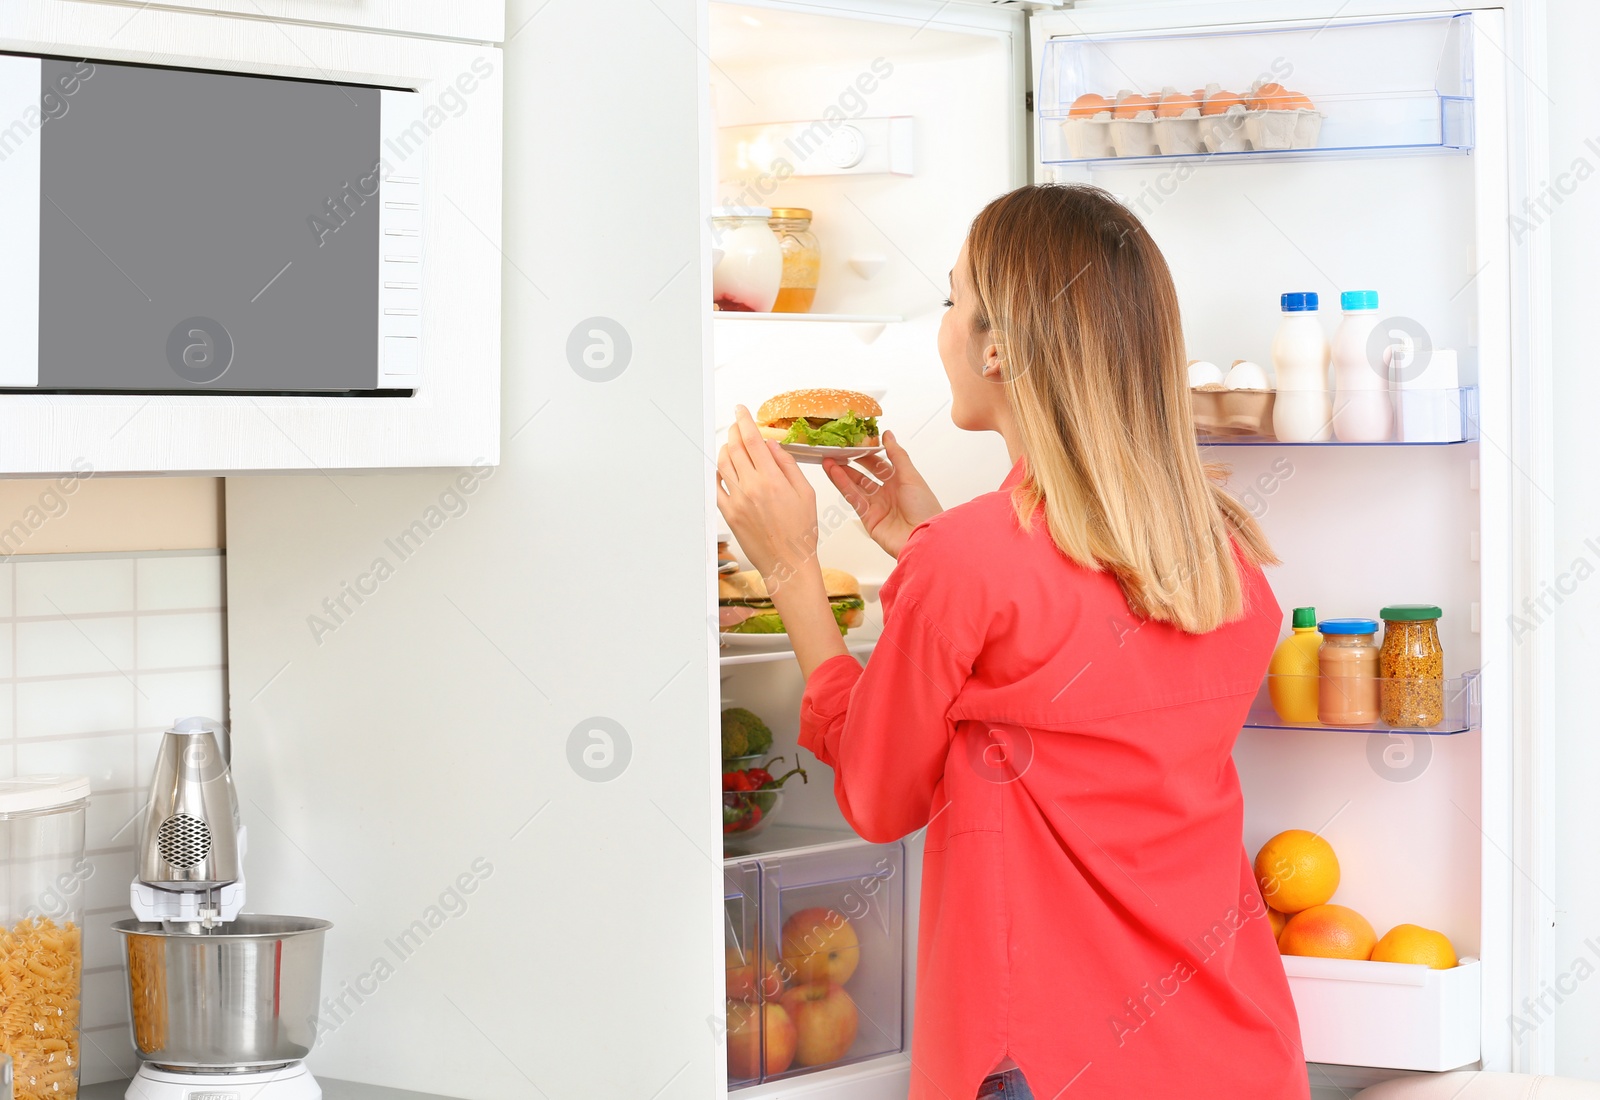 Photo of Young woman taking sandwich from refrigerator in kitchen. Failed diet